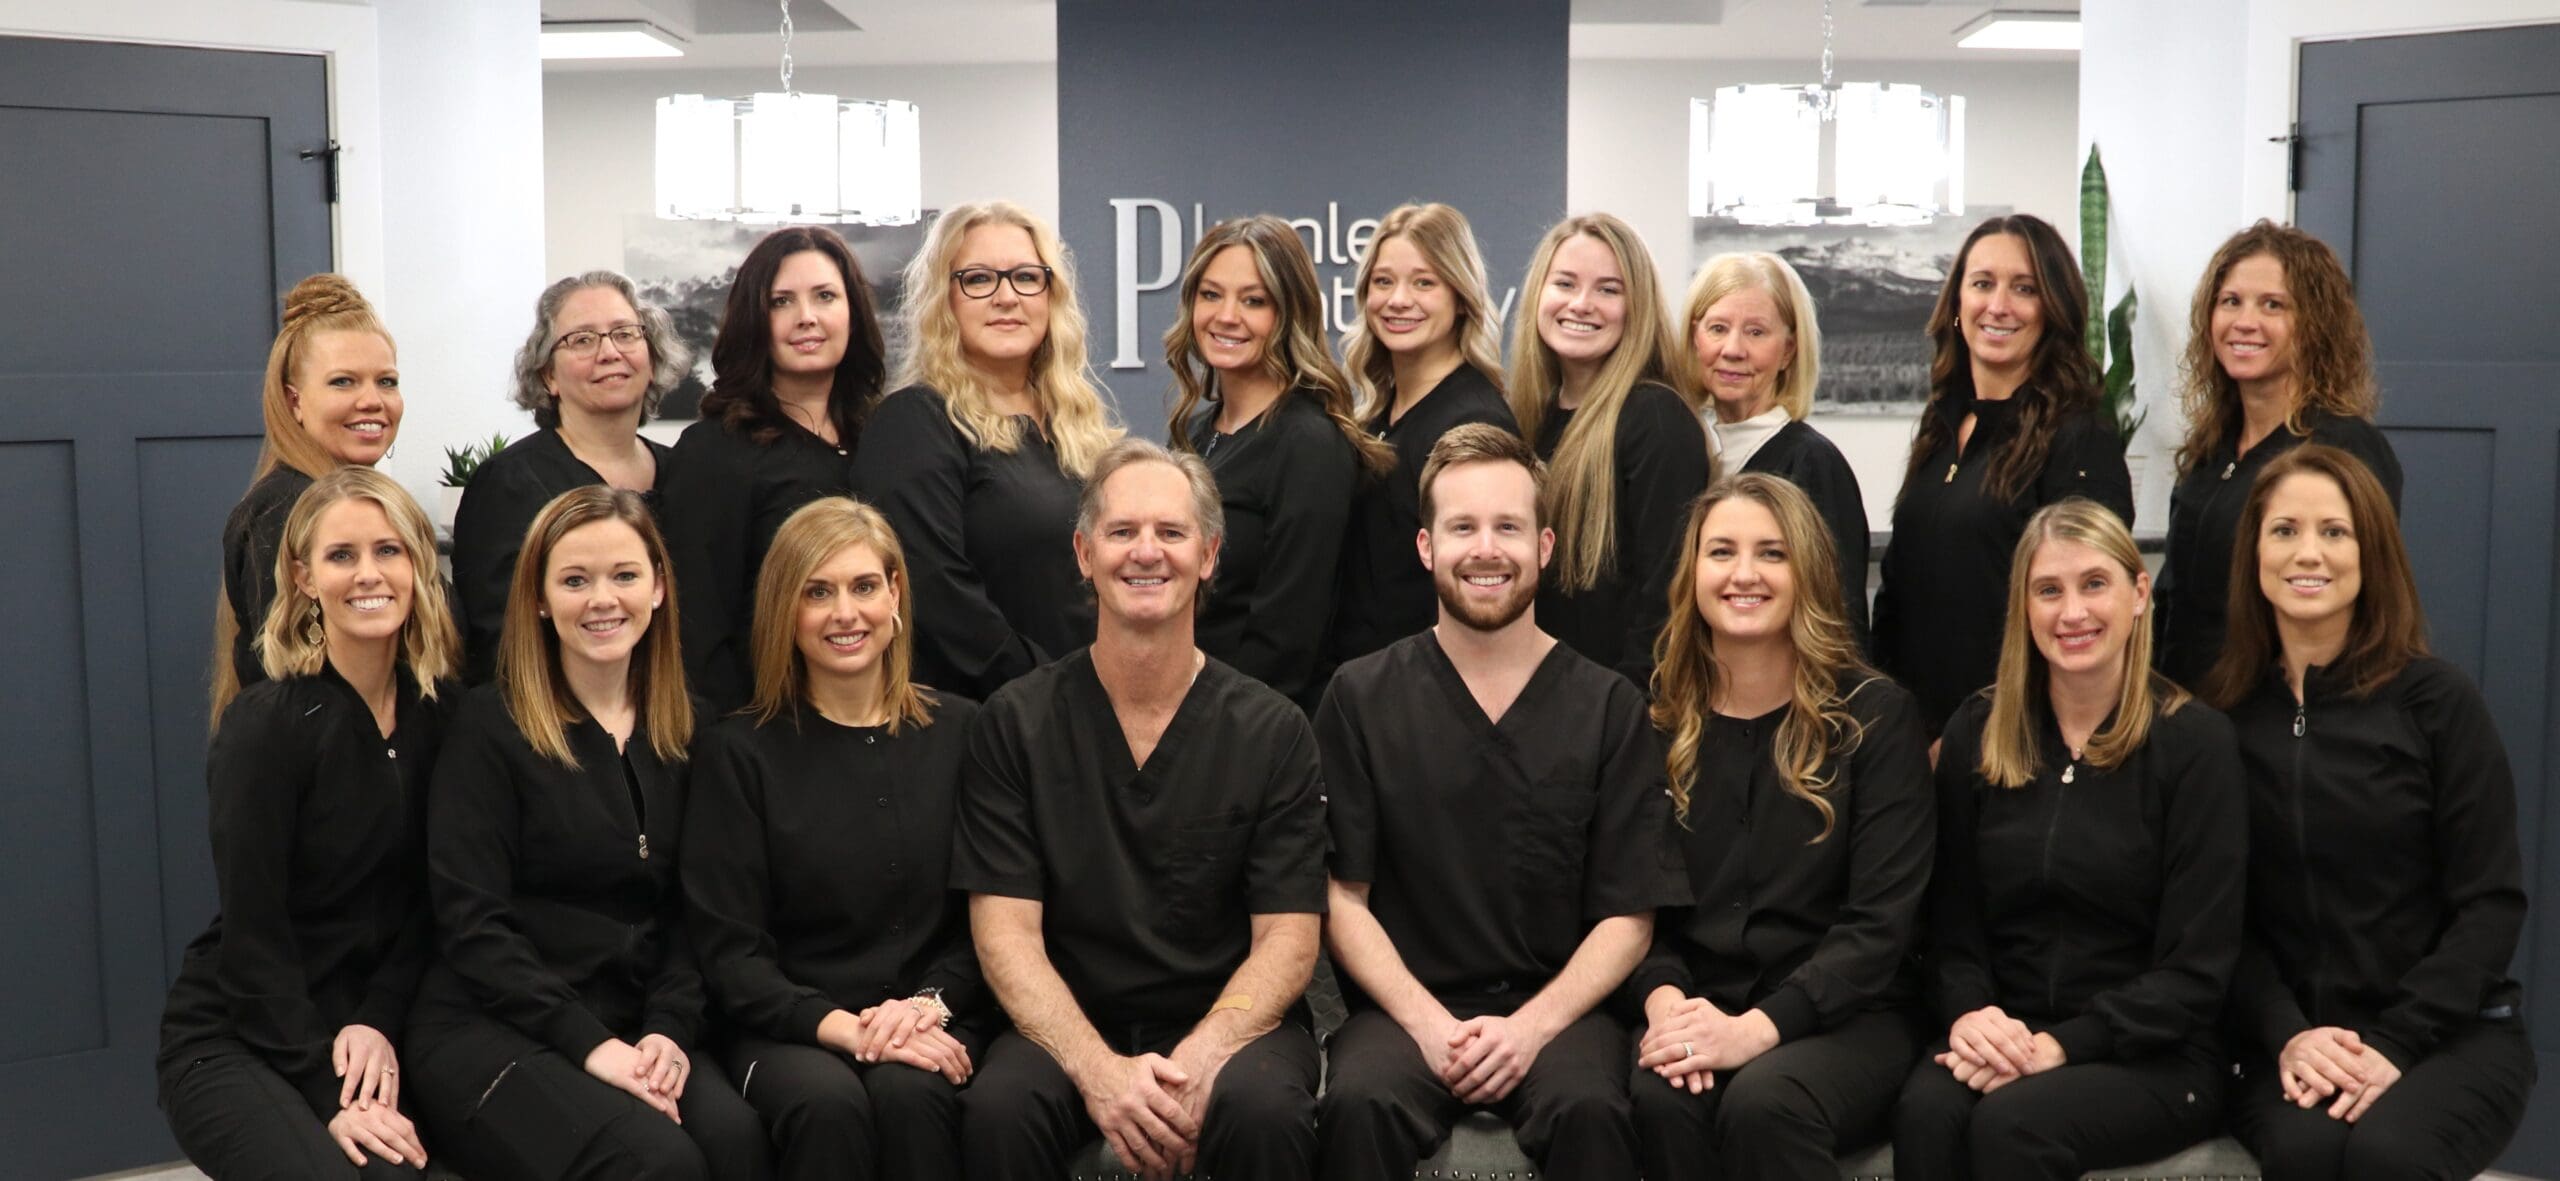 Dental Staff, Plymouth, IN 